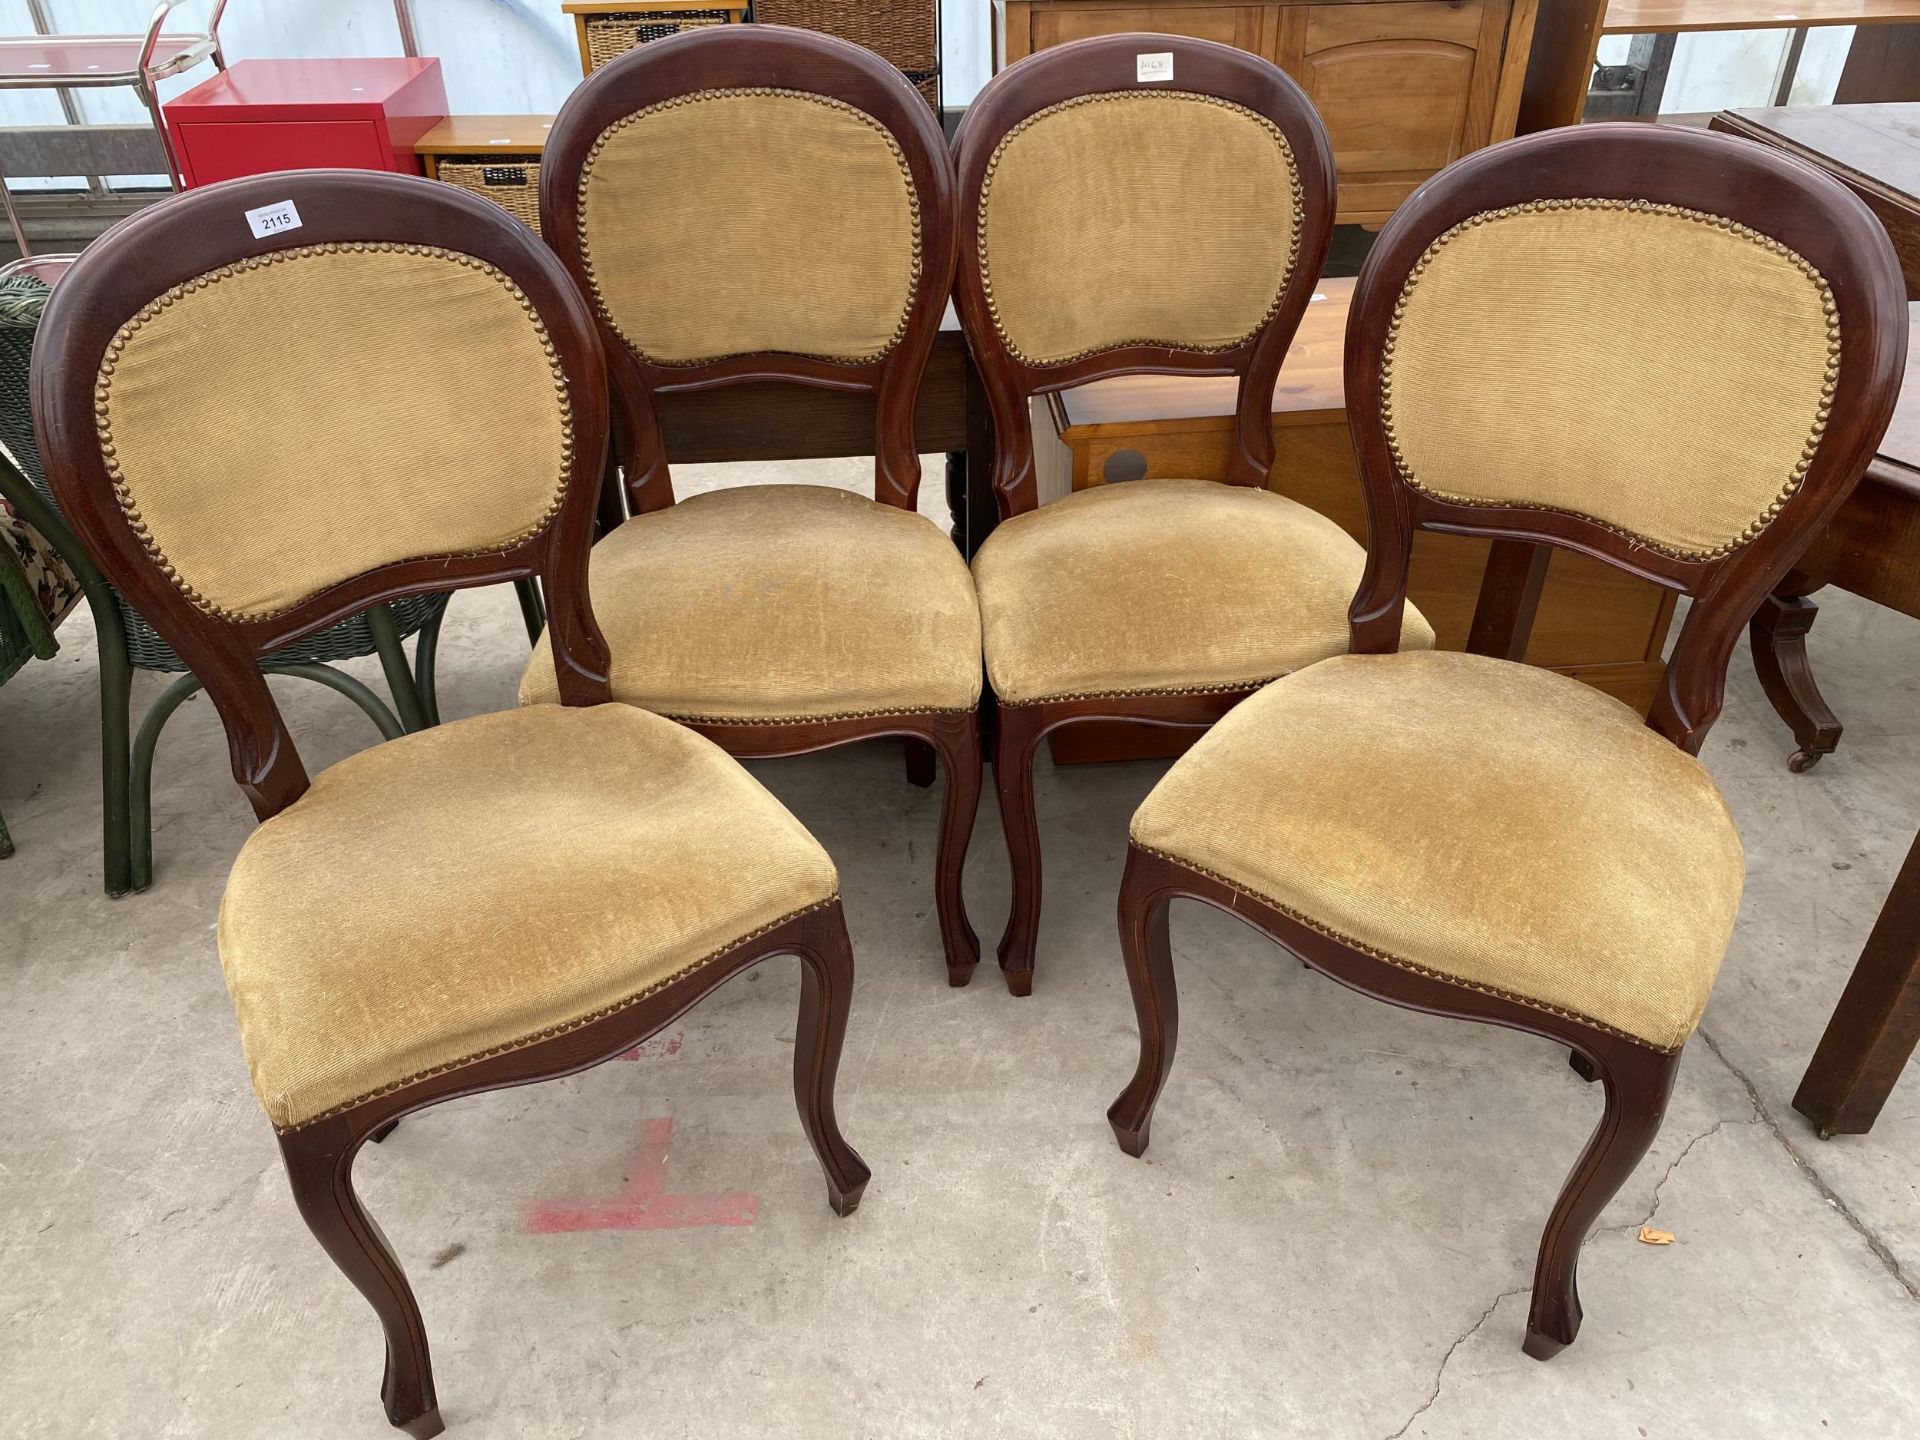 A SET OF FOUR VICTORIAN STYLE DINING CHAIRS